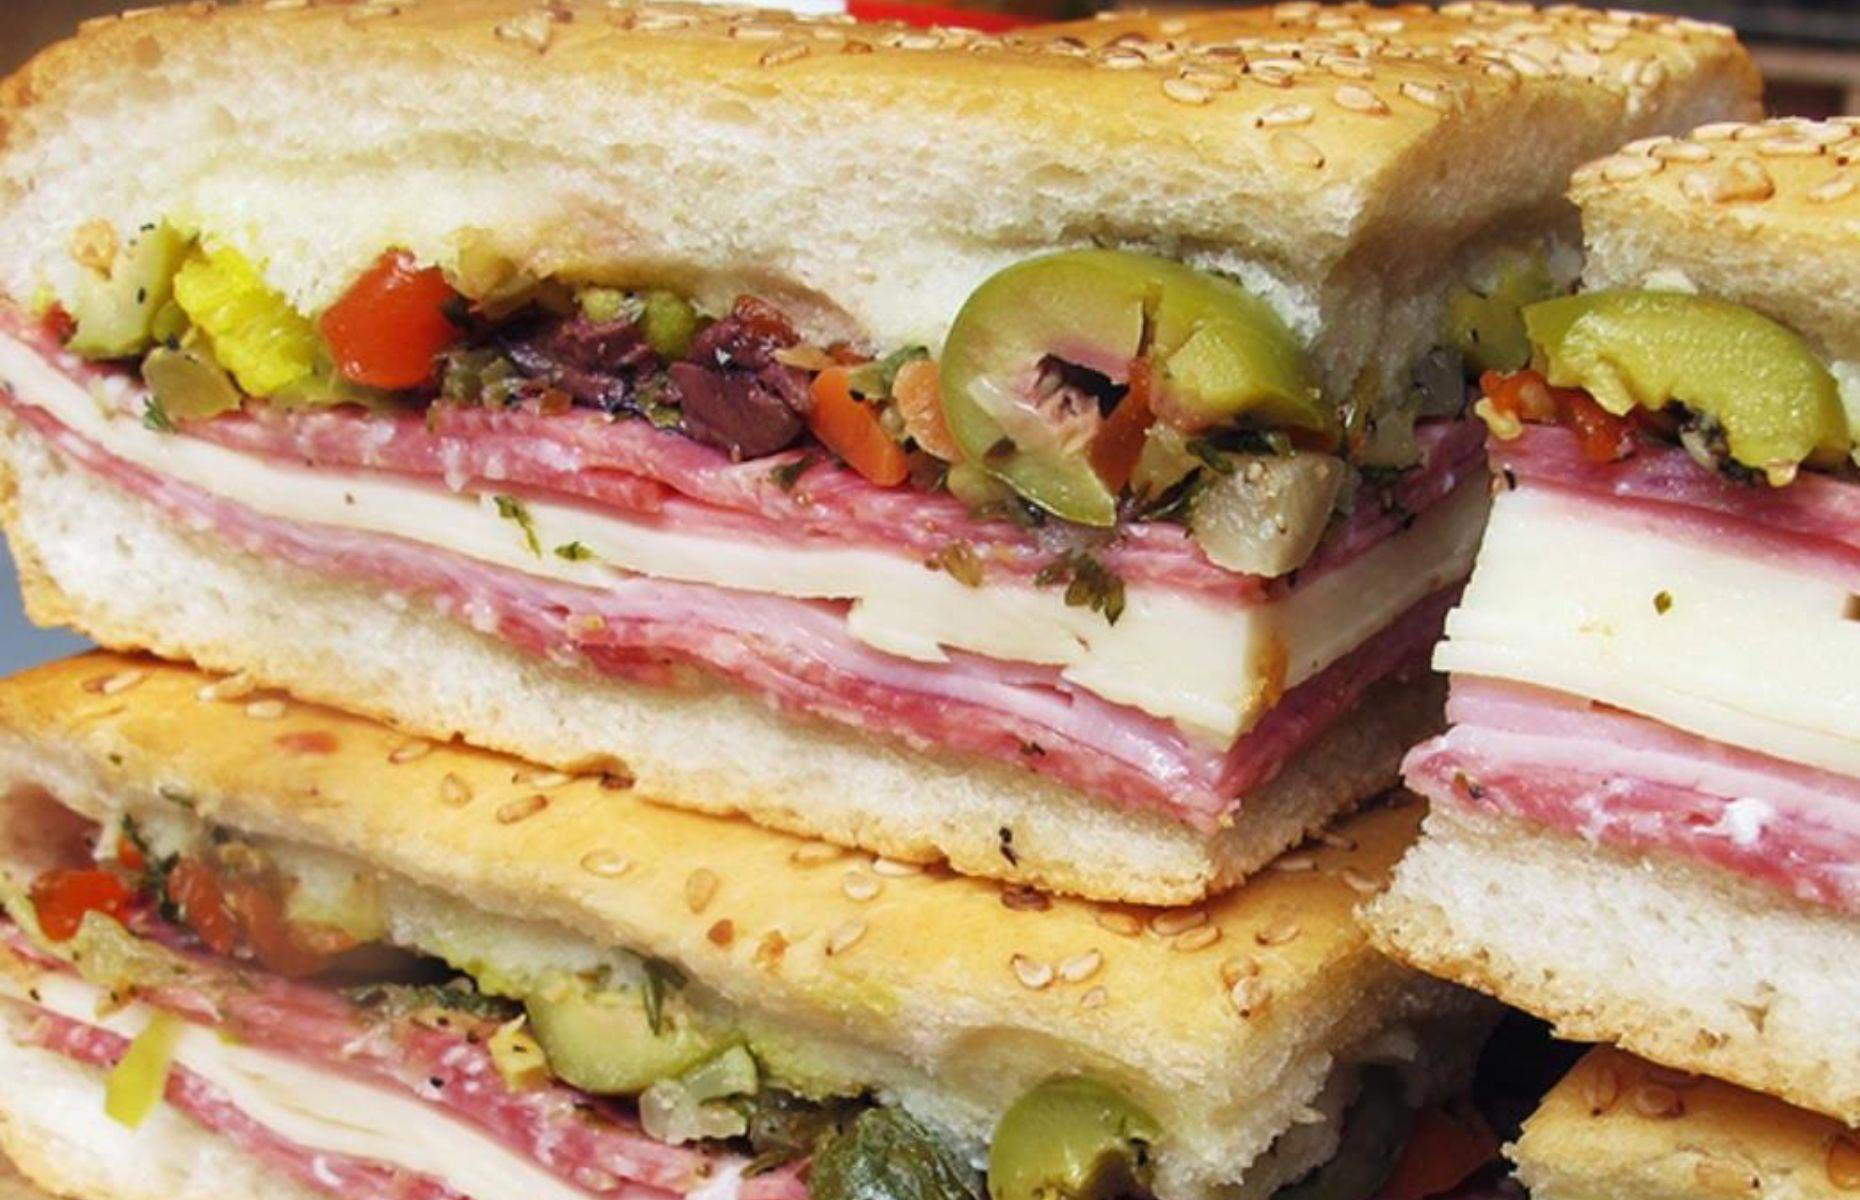 From Sandwiches To Sneakers: The Hollywood Deli That Is A True